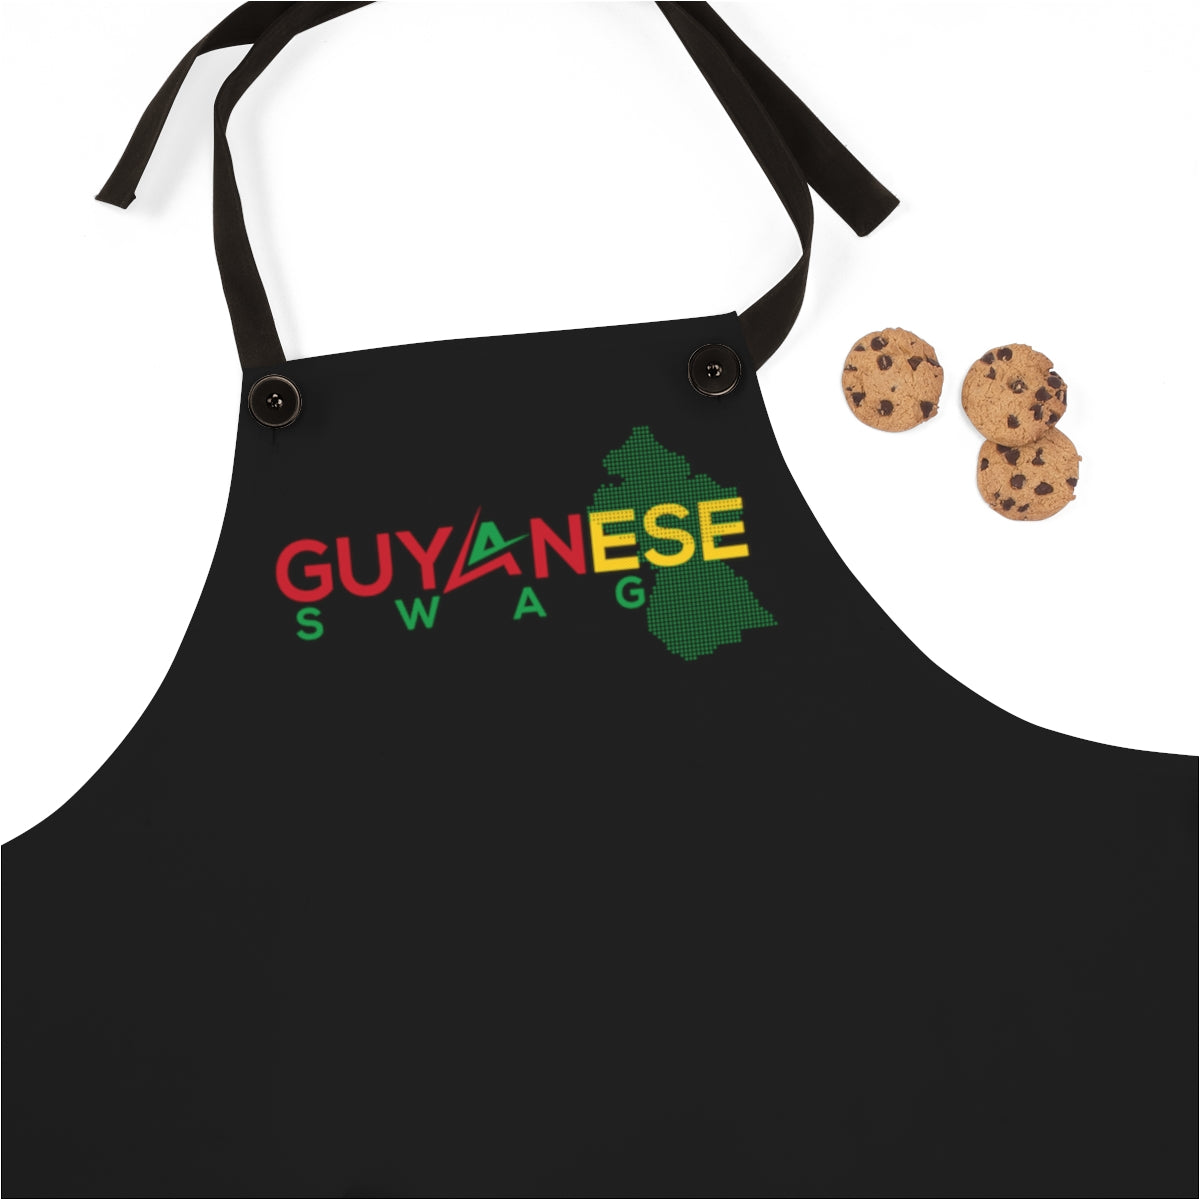 Official Guyanese Swag Guyana Map Apron.